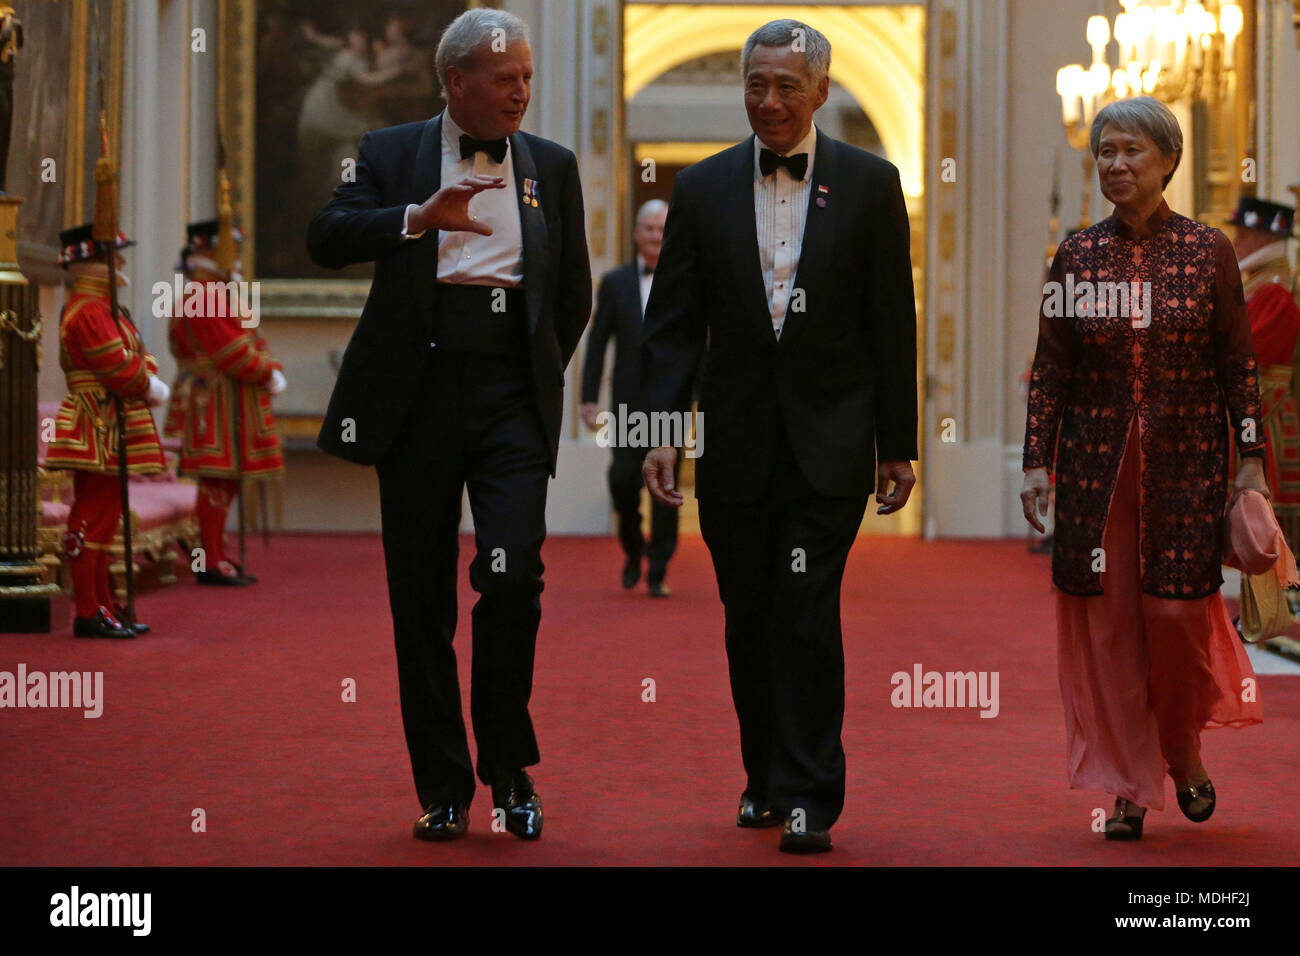 Singapore's Prime Minister Lee Hsien Loong (centre) and his wife Ho Ching arrive in the East Gallery at Buckingham Palace in London as Queen Elizabeth II hosts a dinner during the Commonwealth Heads of Government Meeting. Stock Photo